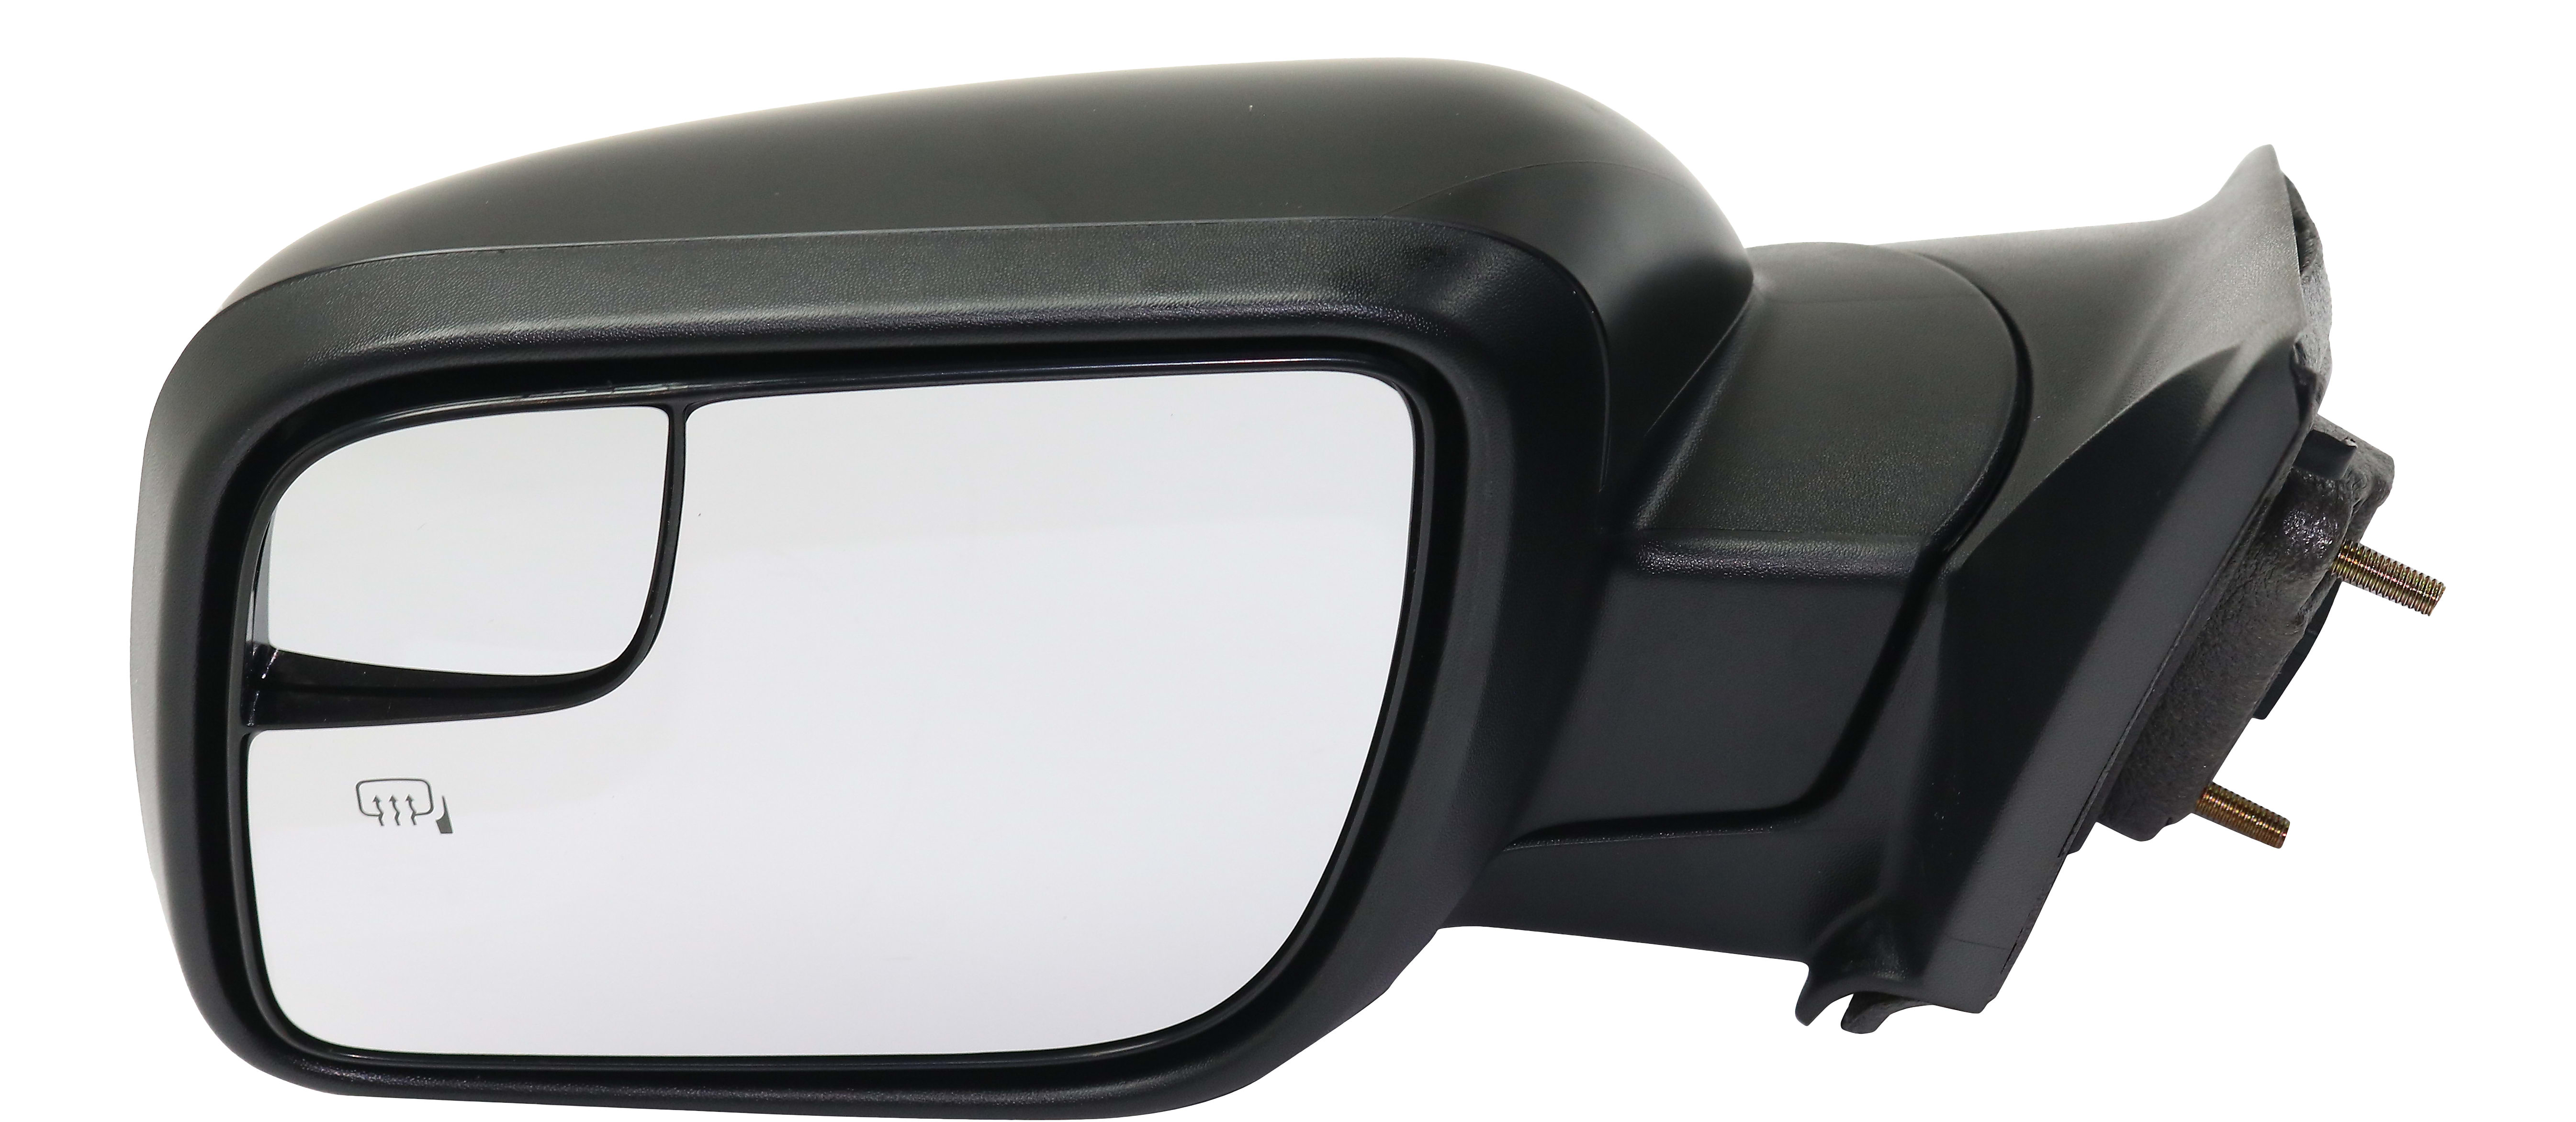 2018 Ford Explorer Mirrors from $113 | CarParts.com 2018 Ford Explorer Driver Side Mirror Replacement